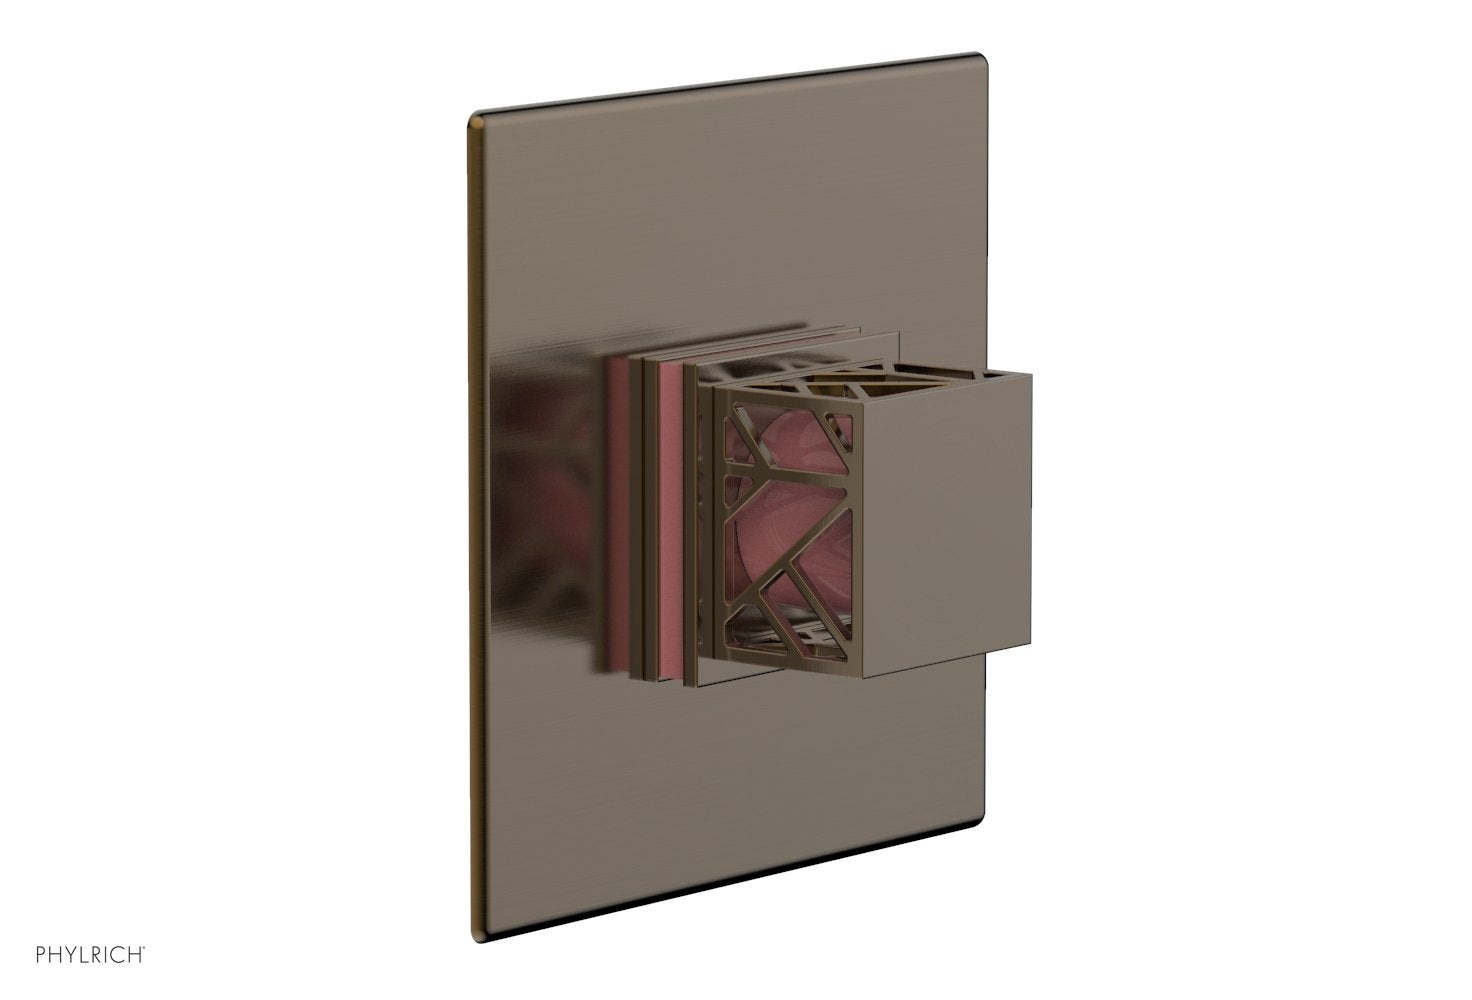 Phylrich JOLIE Pressure Balance Shower Plate & Handle Trim, Square Handle with "Pink" Accents